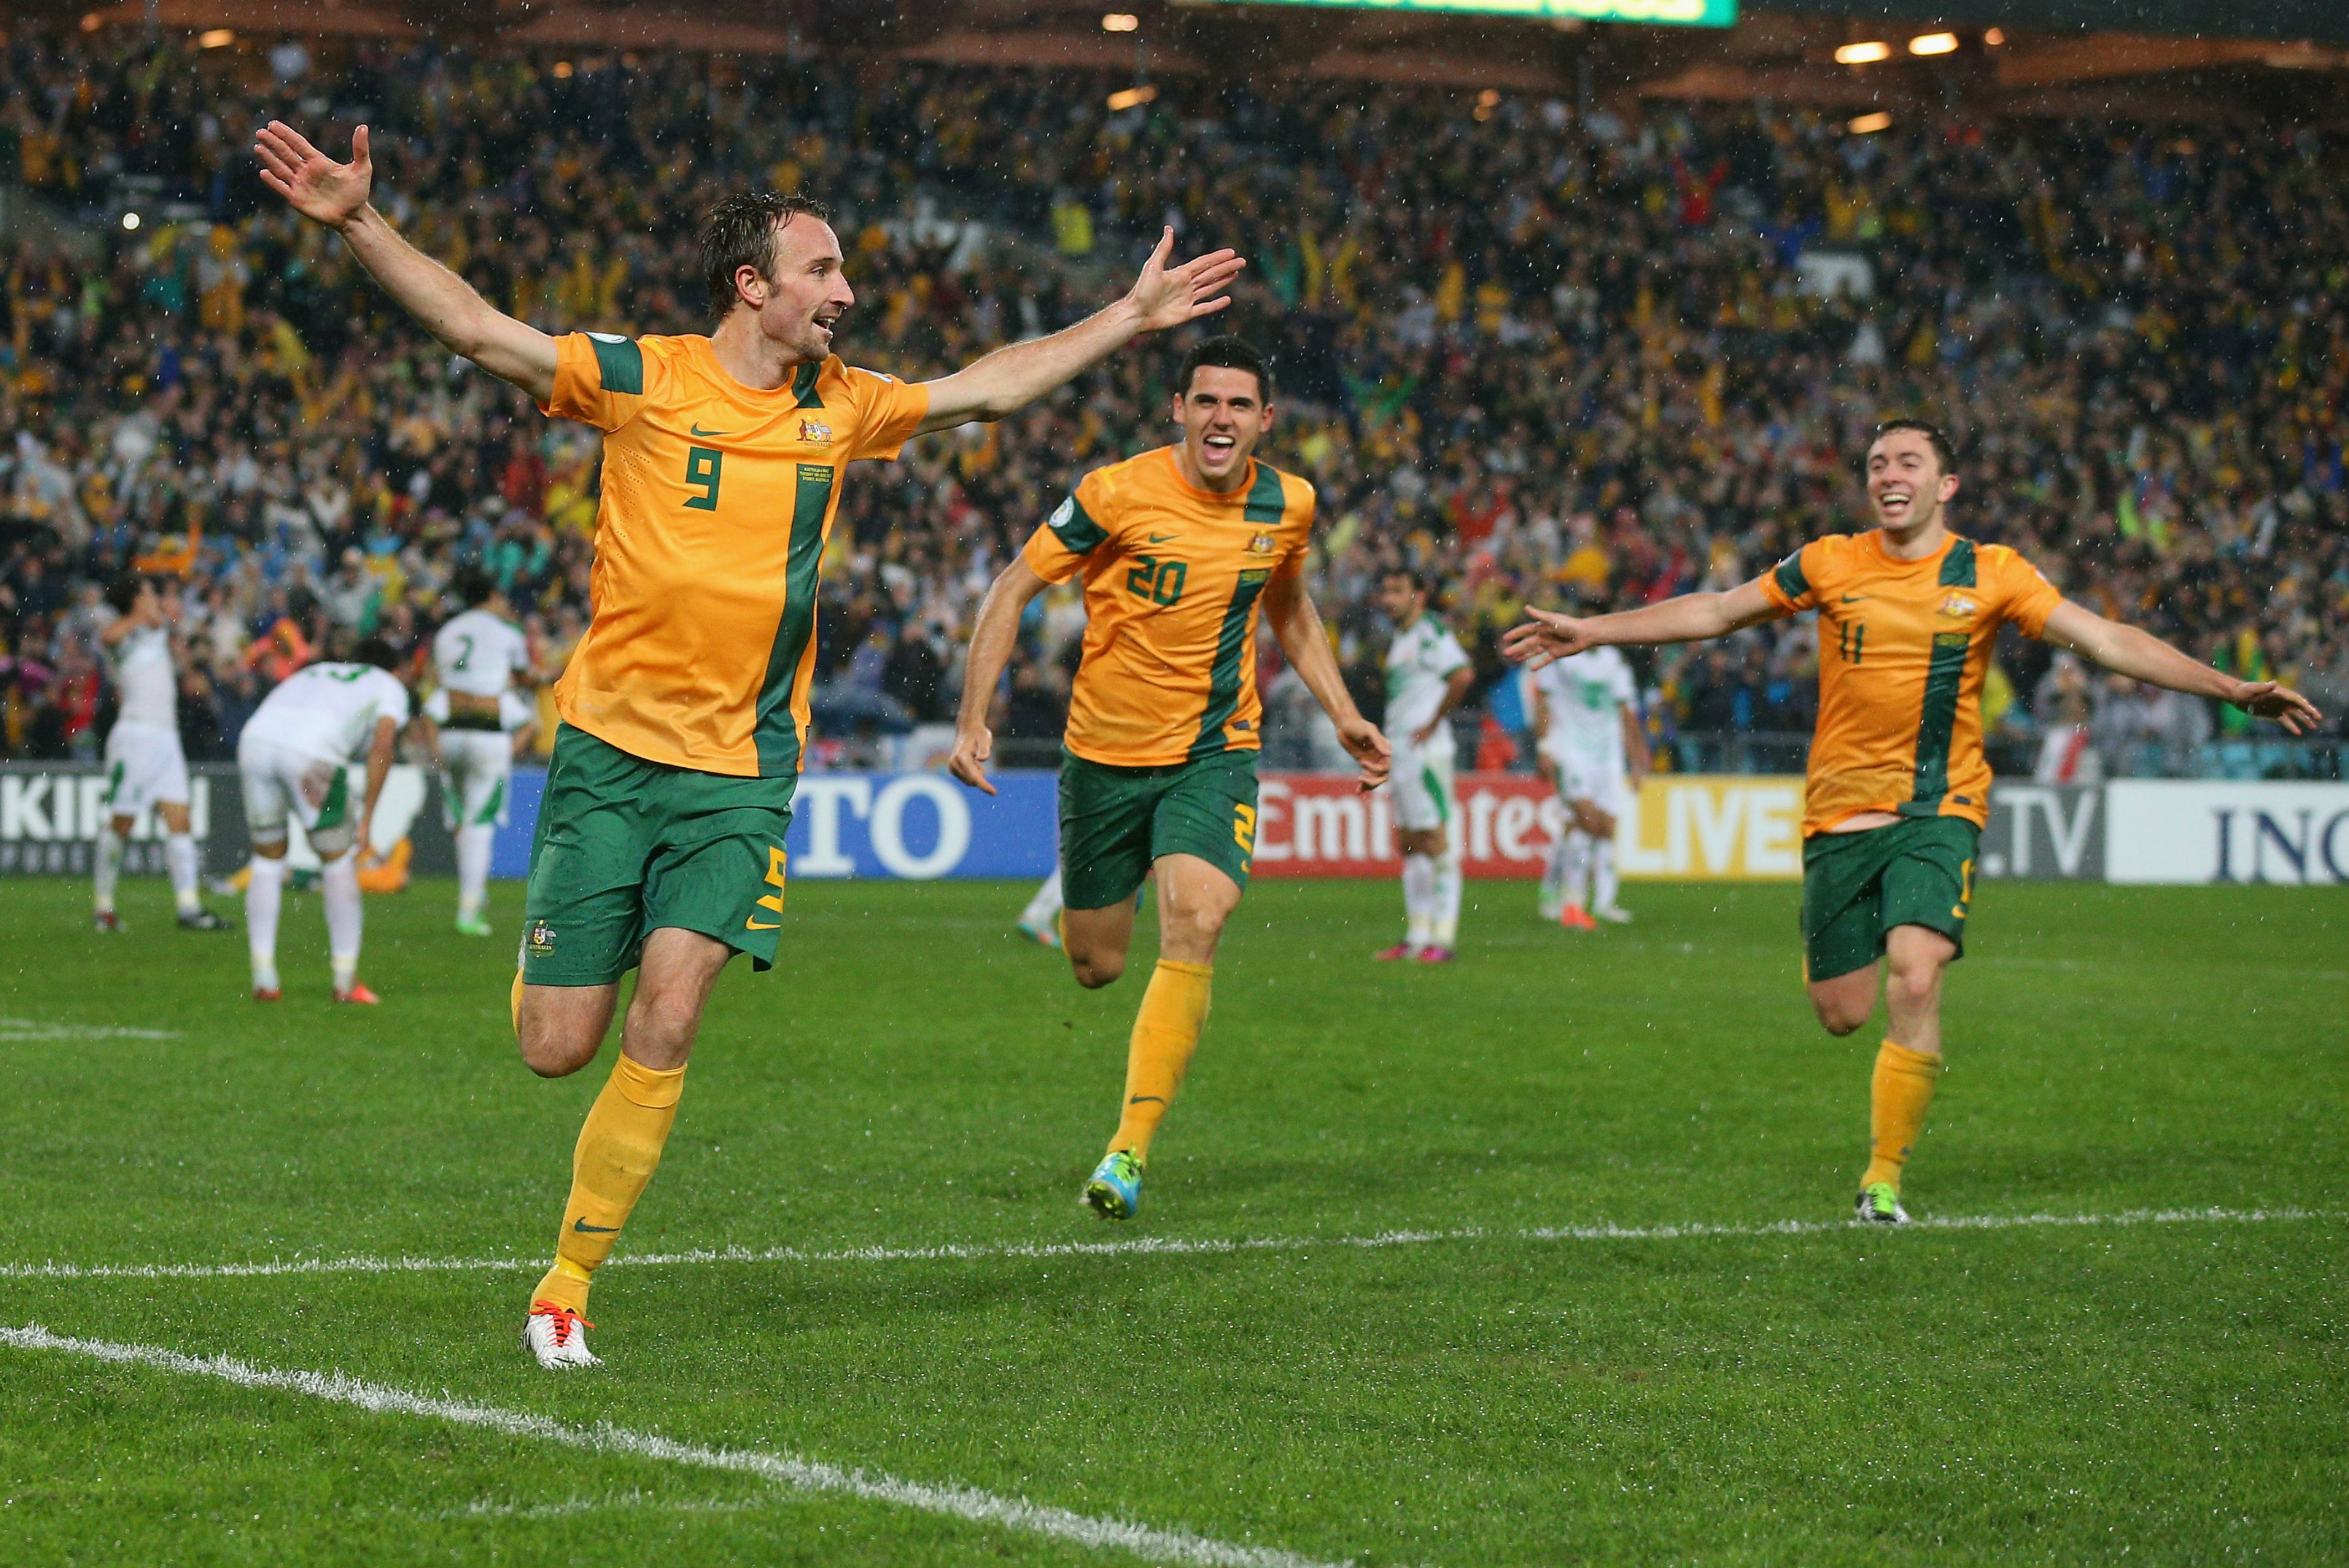 June 2013: Josh Kennedy scores a late header to seal Australia’s spot at the 2014 FIFA World Cup in Brazil with a 1-0 win over Iraq.